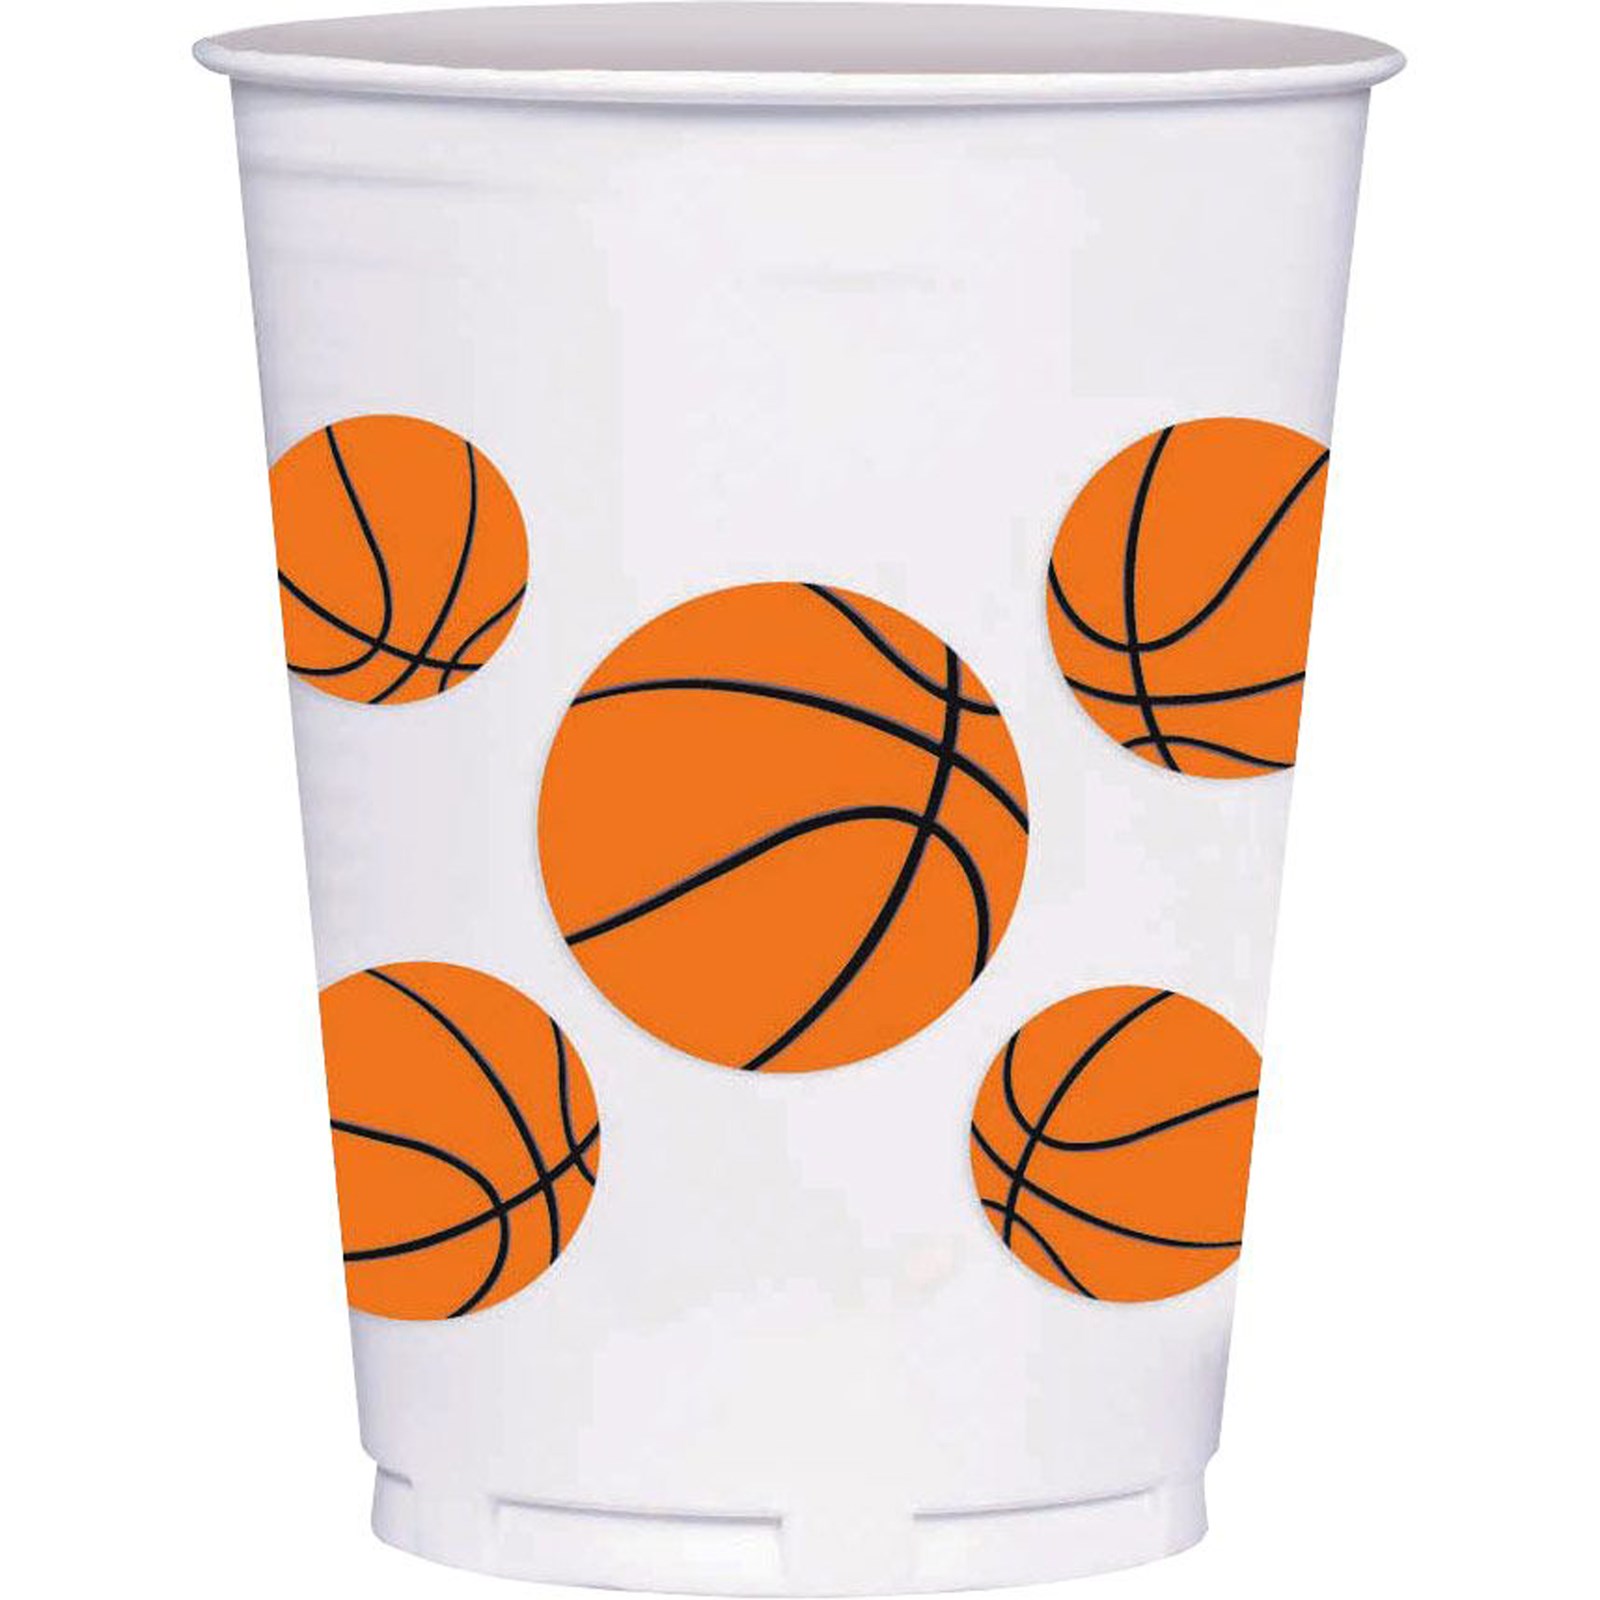 Basketball 14 oz. Plastic Cups 8 count